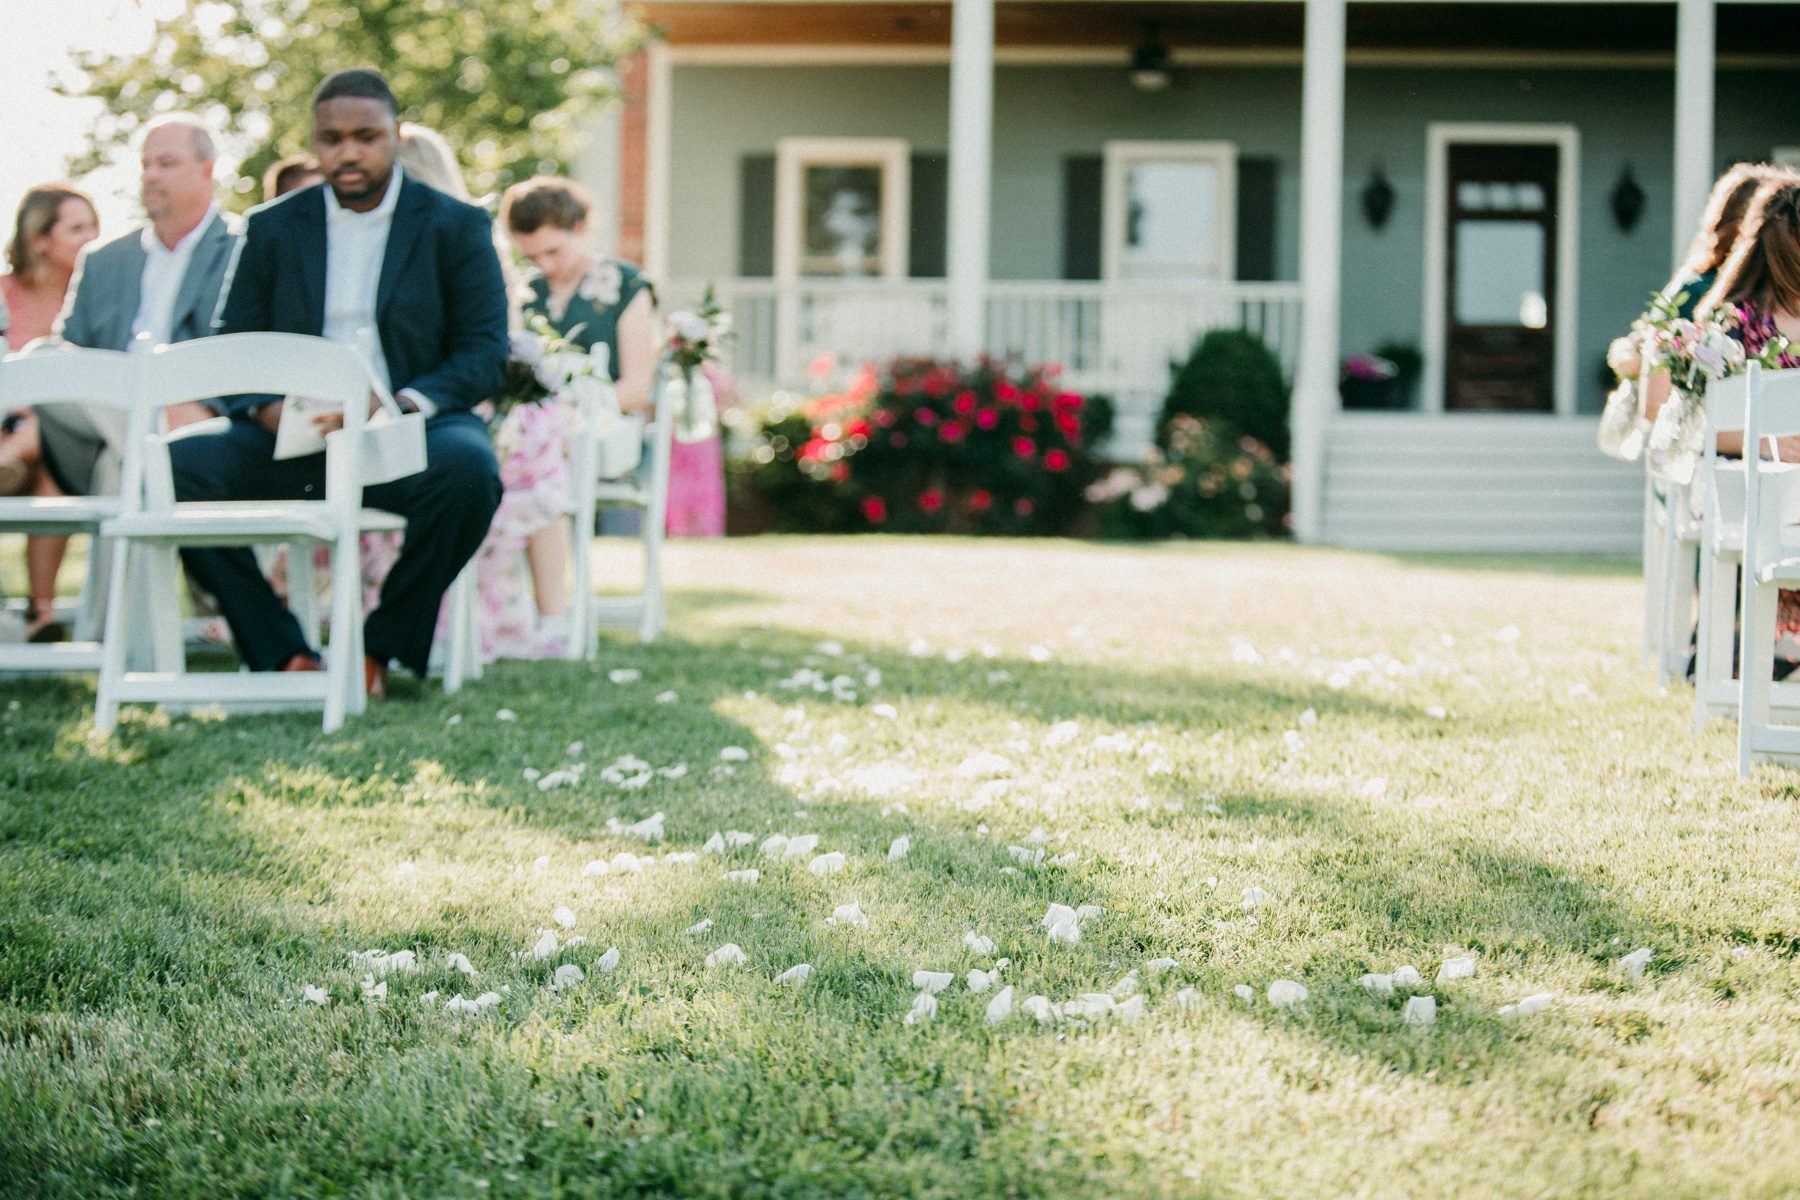 Rose petals in aisle for outdoor wedding ceremony 